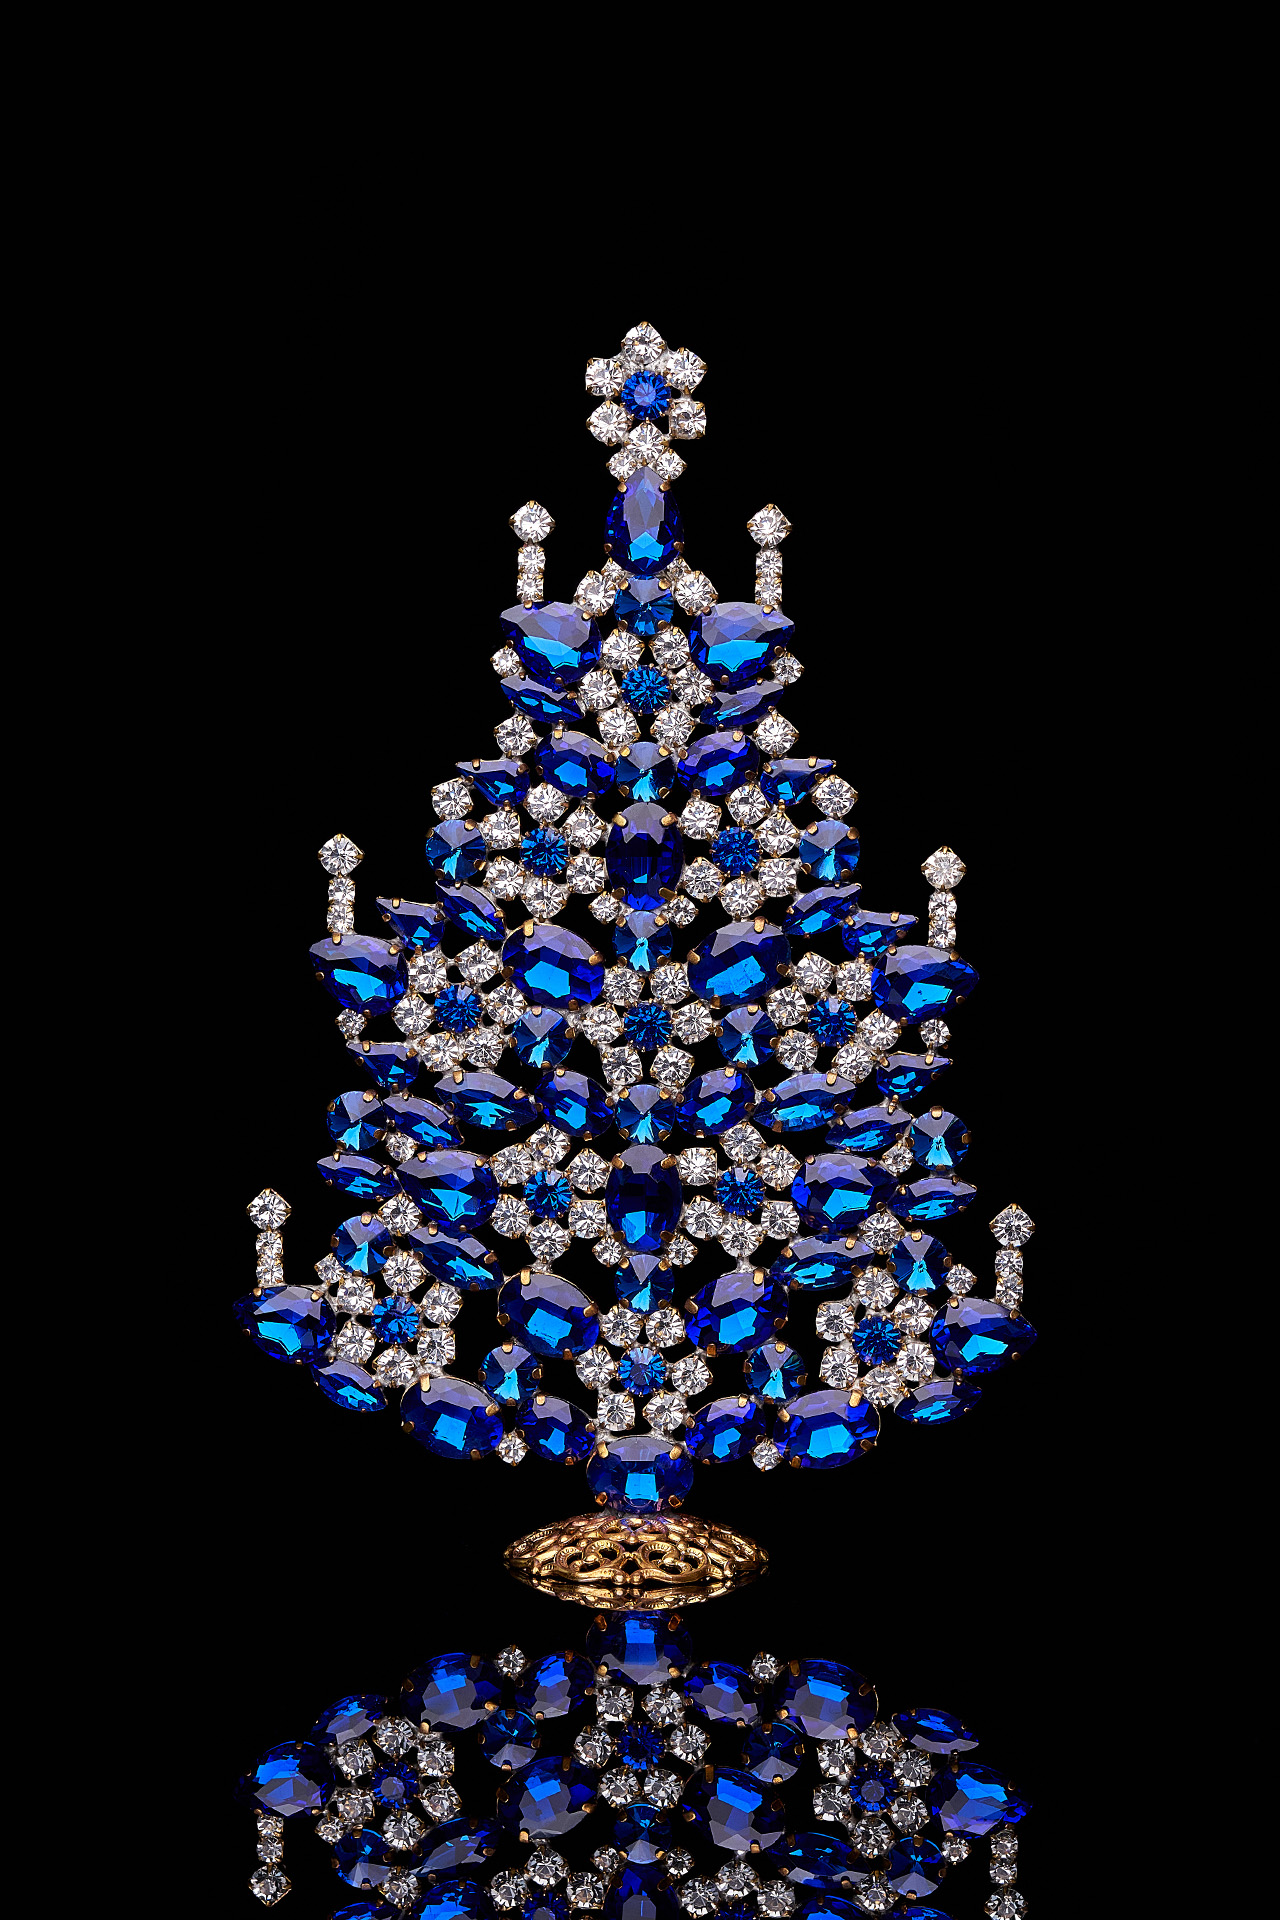 Sparkly Christmas tree handmade with clear and blue rhinestones